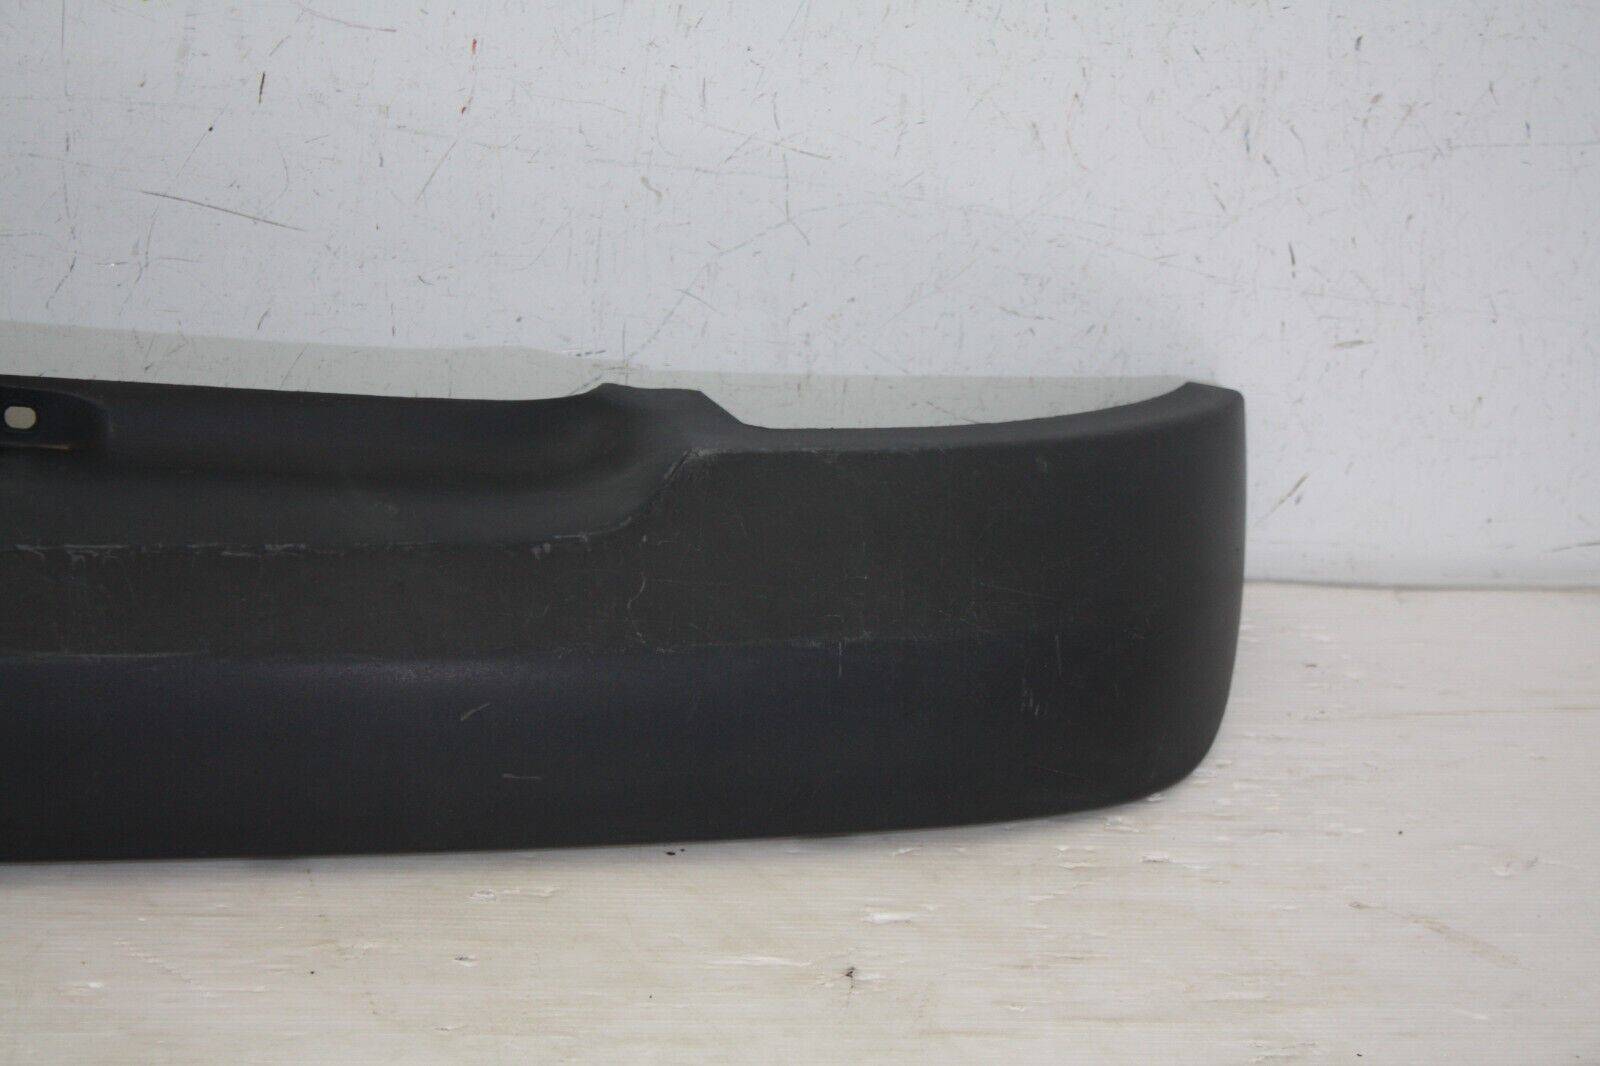 Renault-Clio-Rear-Bumper-Upper-Section-2001-TO-2005-8200083217-Genuine-176093485781-2